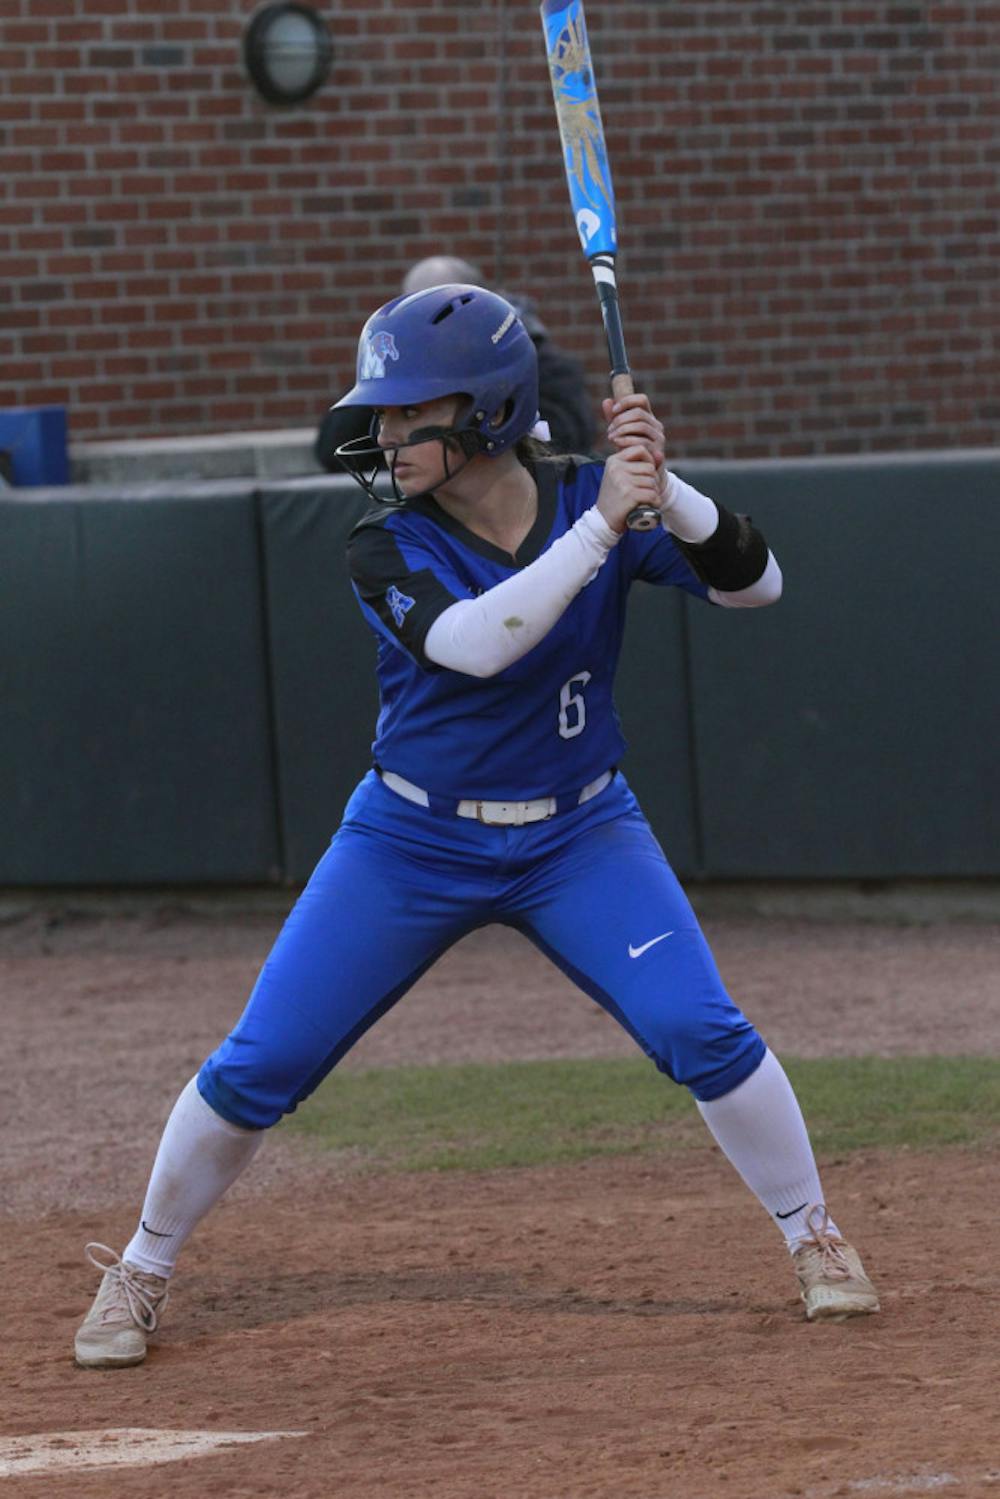 <p>Addison Maxwell gets set to swing. The Collierville native has a .310 batting average and was named AAC player of the week.</p>